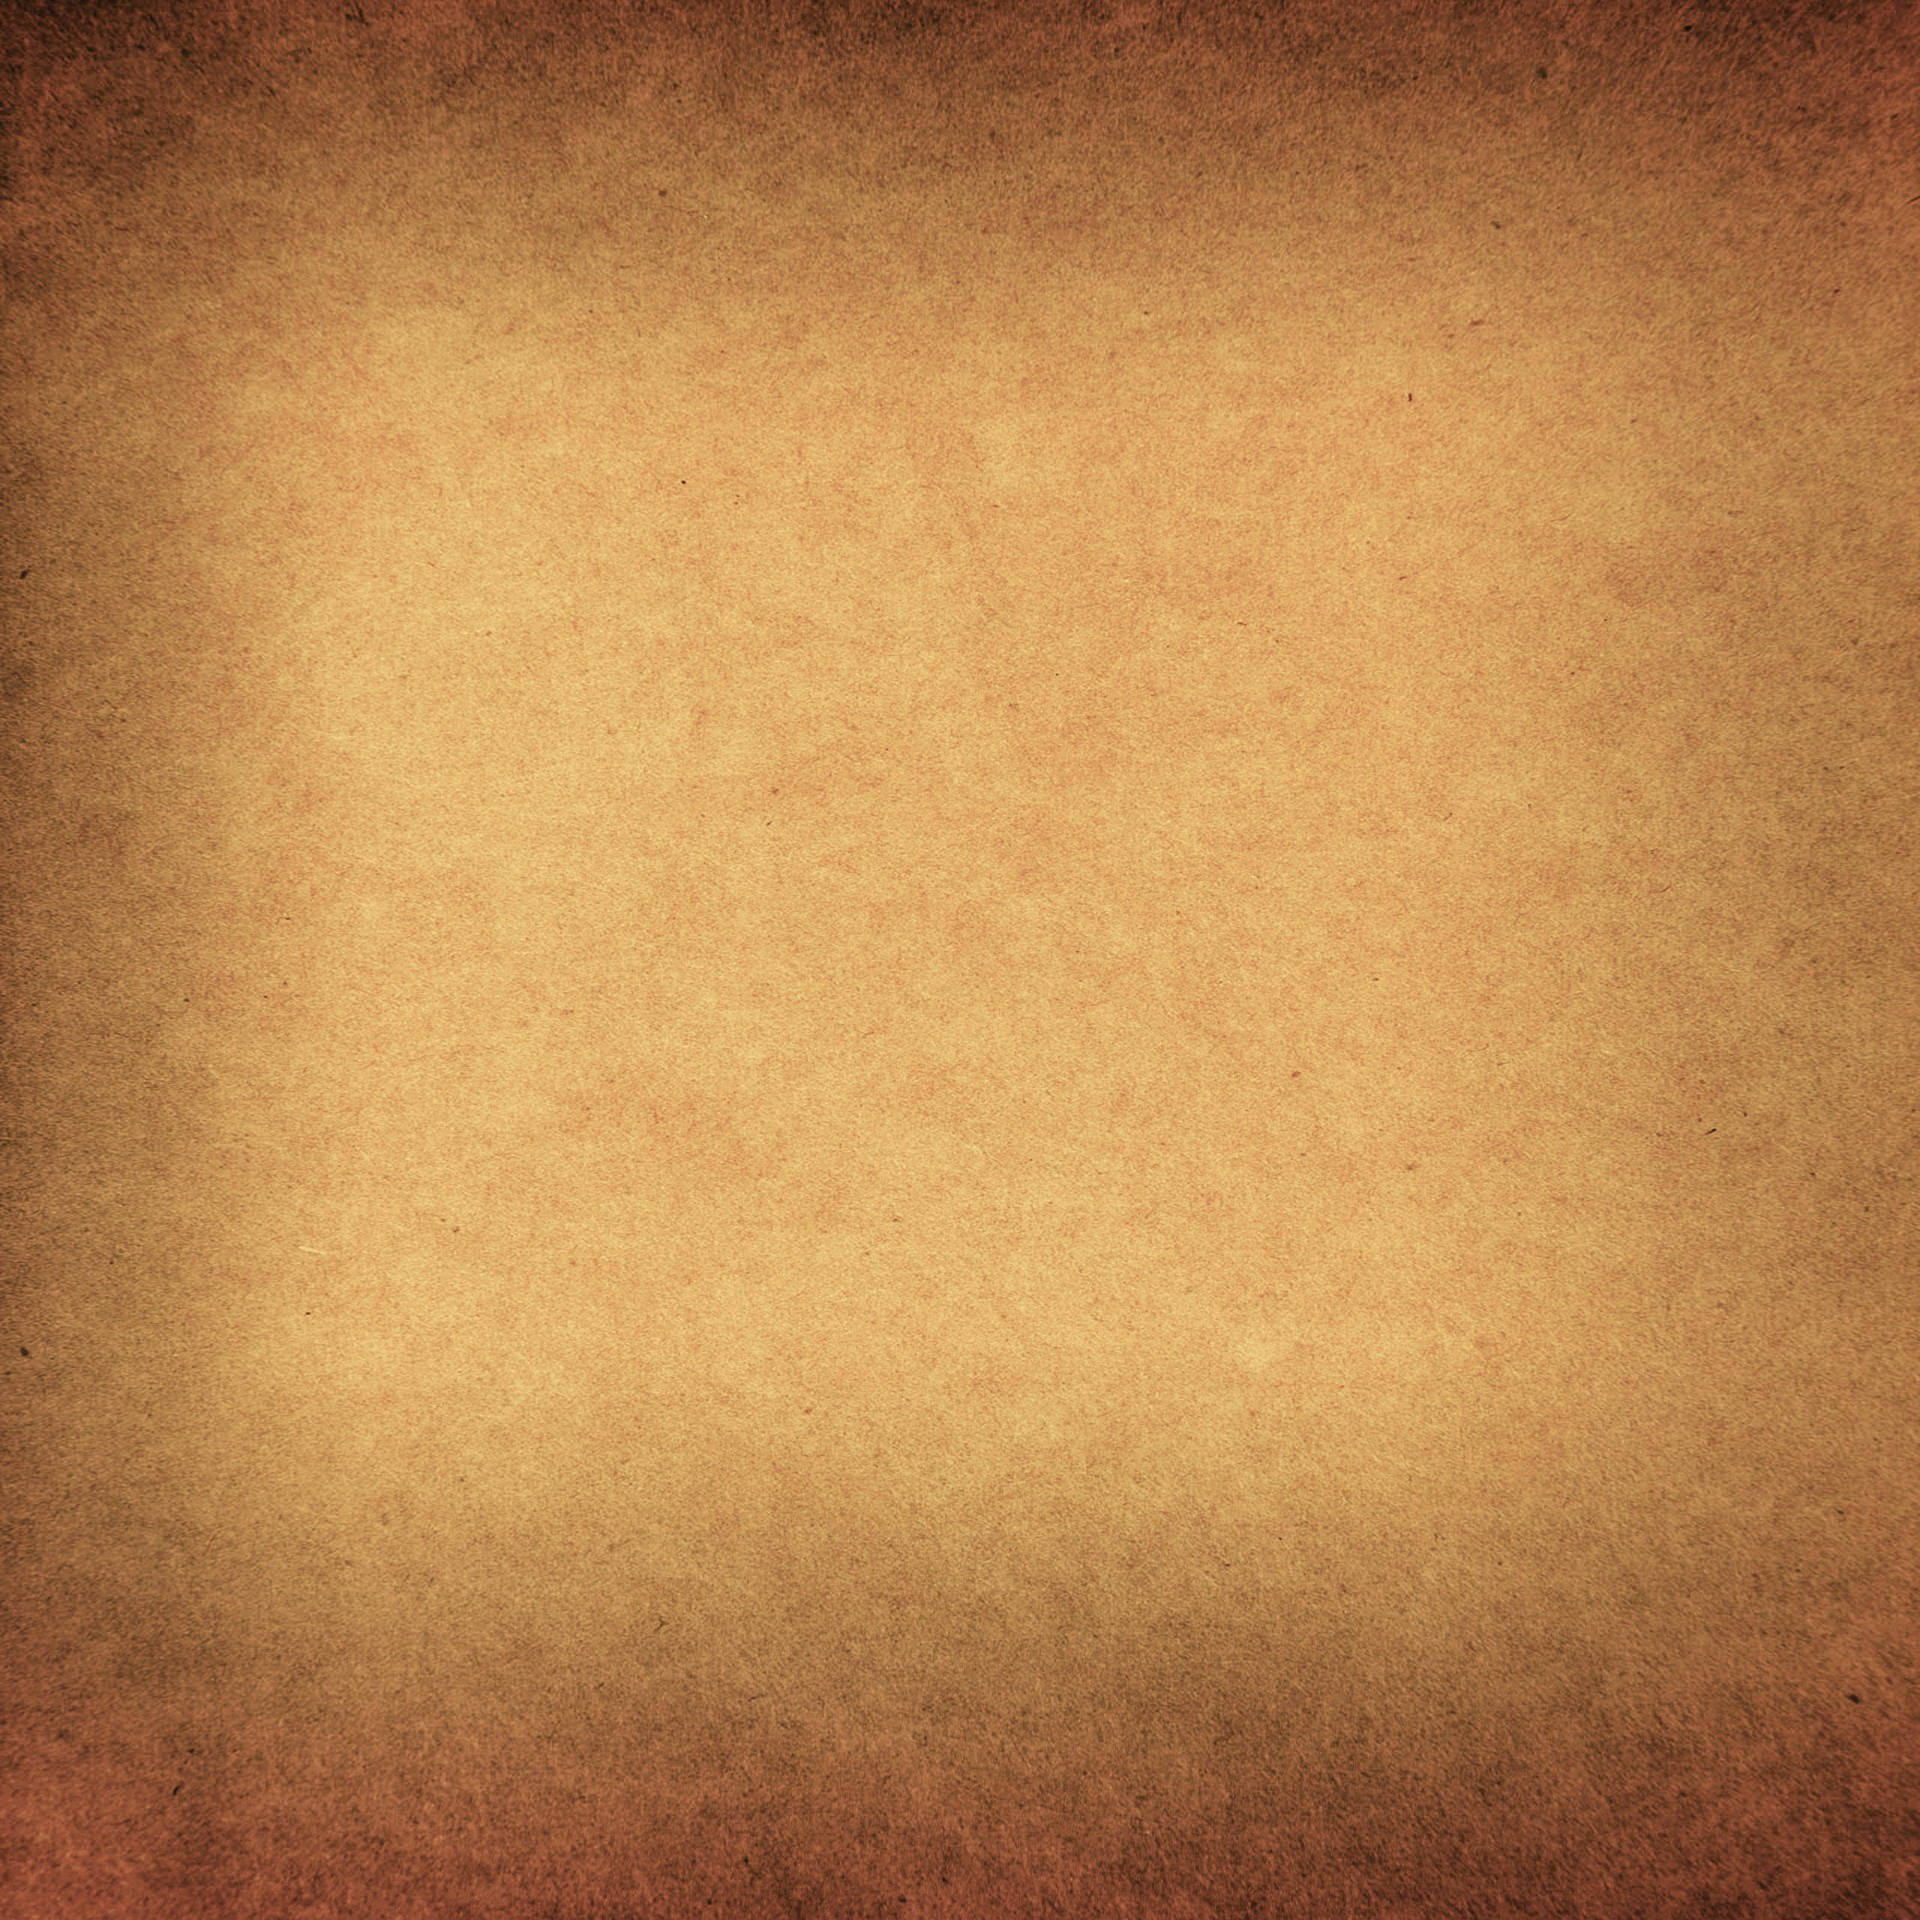 Undecorated Brown Old Paper